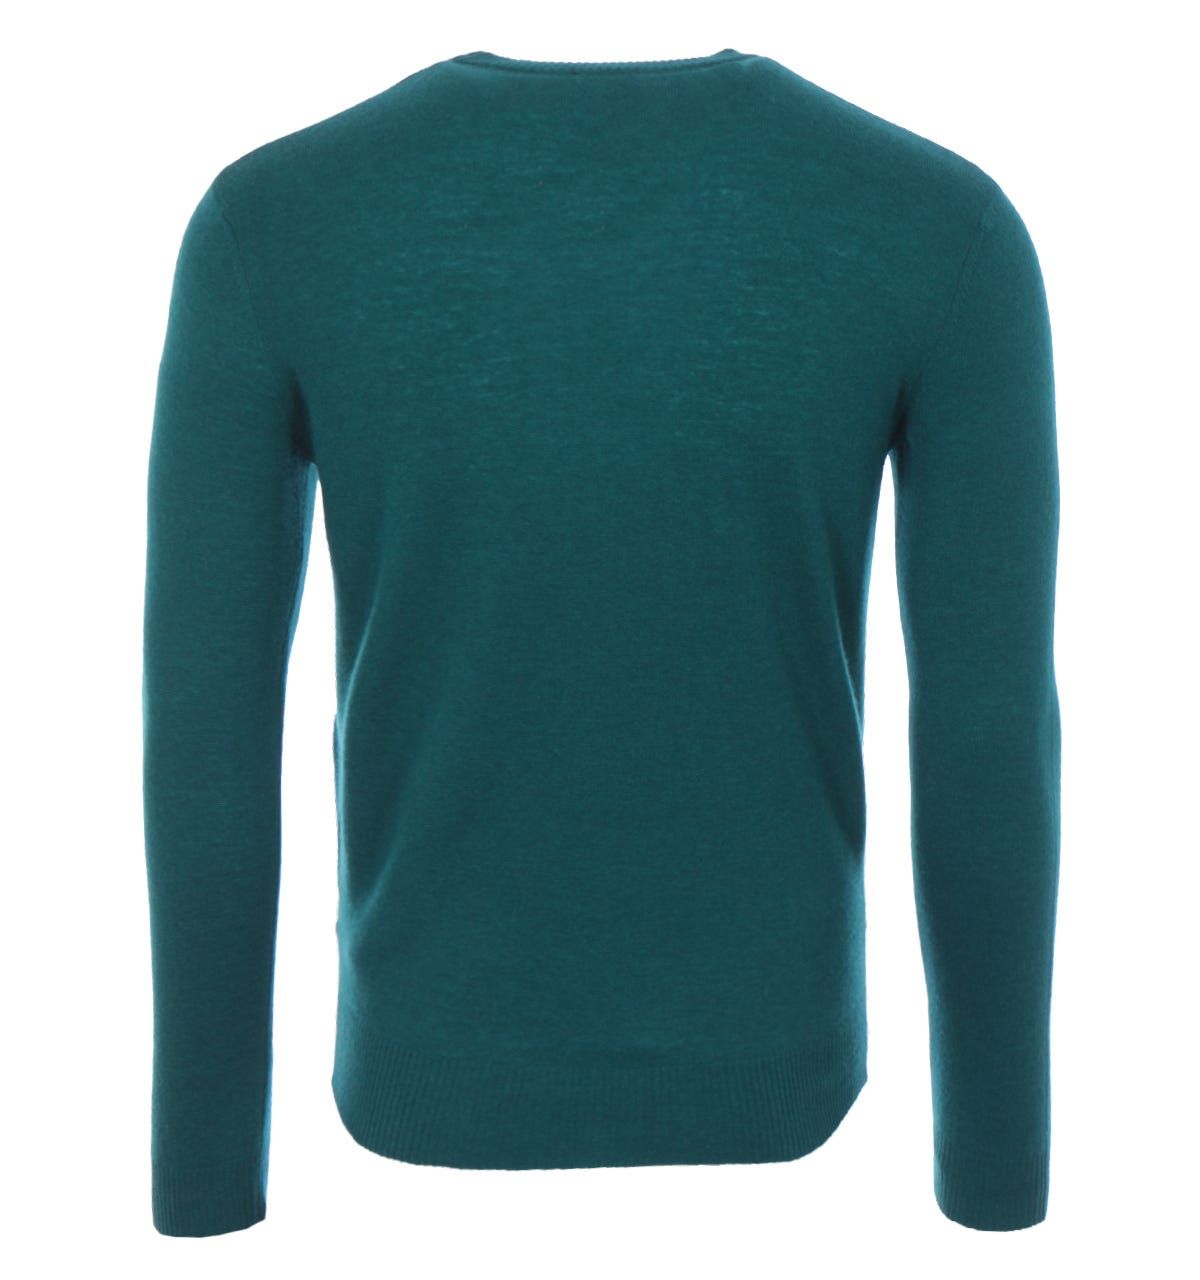 Knitted from a super soft  wool and cashmere blend, this classic crew neck sweater, has been refreshed with Diesel DNA. Featuring a ribbed crew neck, cuffs and hem. Finished with the iconic broken Diesel logo across the chest.Regular Fit, Wool & Cashmere Blend, Classic Crew Neck, Ribbed Cuffs & Hemline, Diesel Branding. Style & Fit:Regular Fit, Fits True to Size. Composition & Care:87% Wool, 13% Cashmere, Hand Wash.